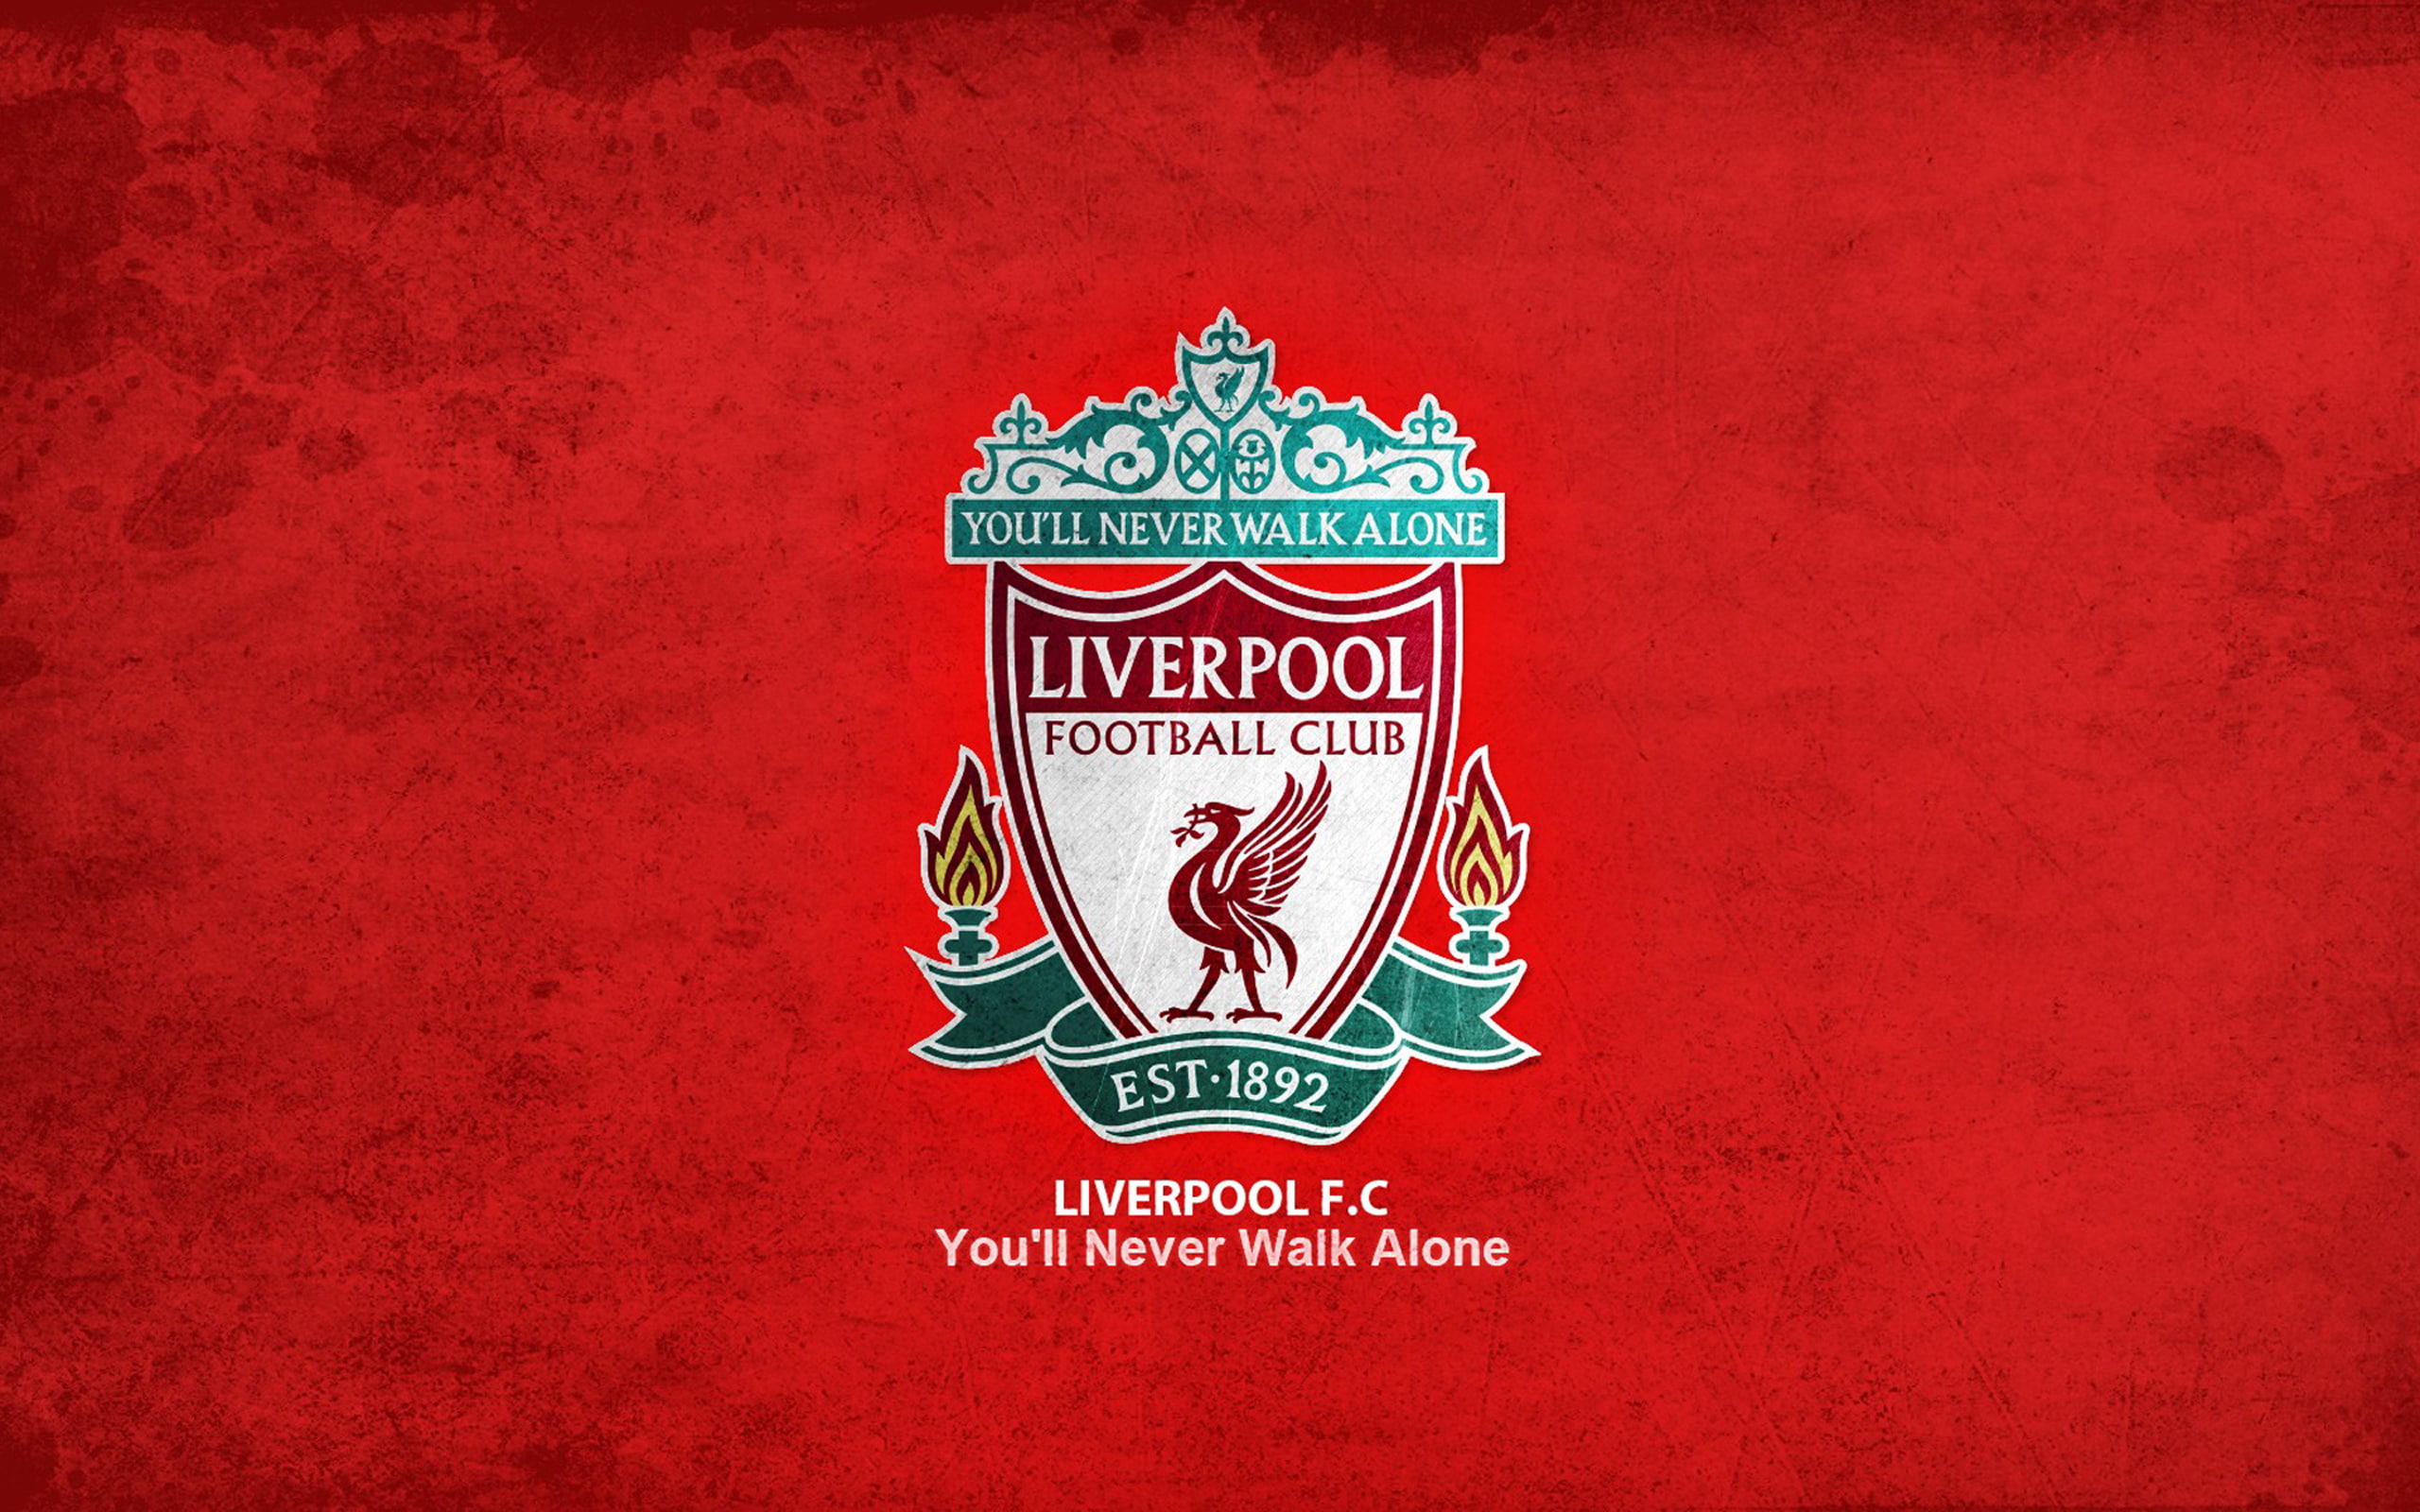 Liverpool FC, brand and logo